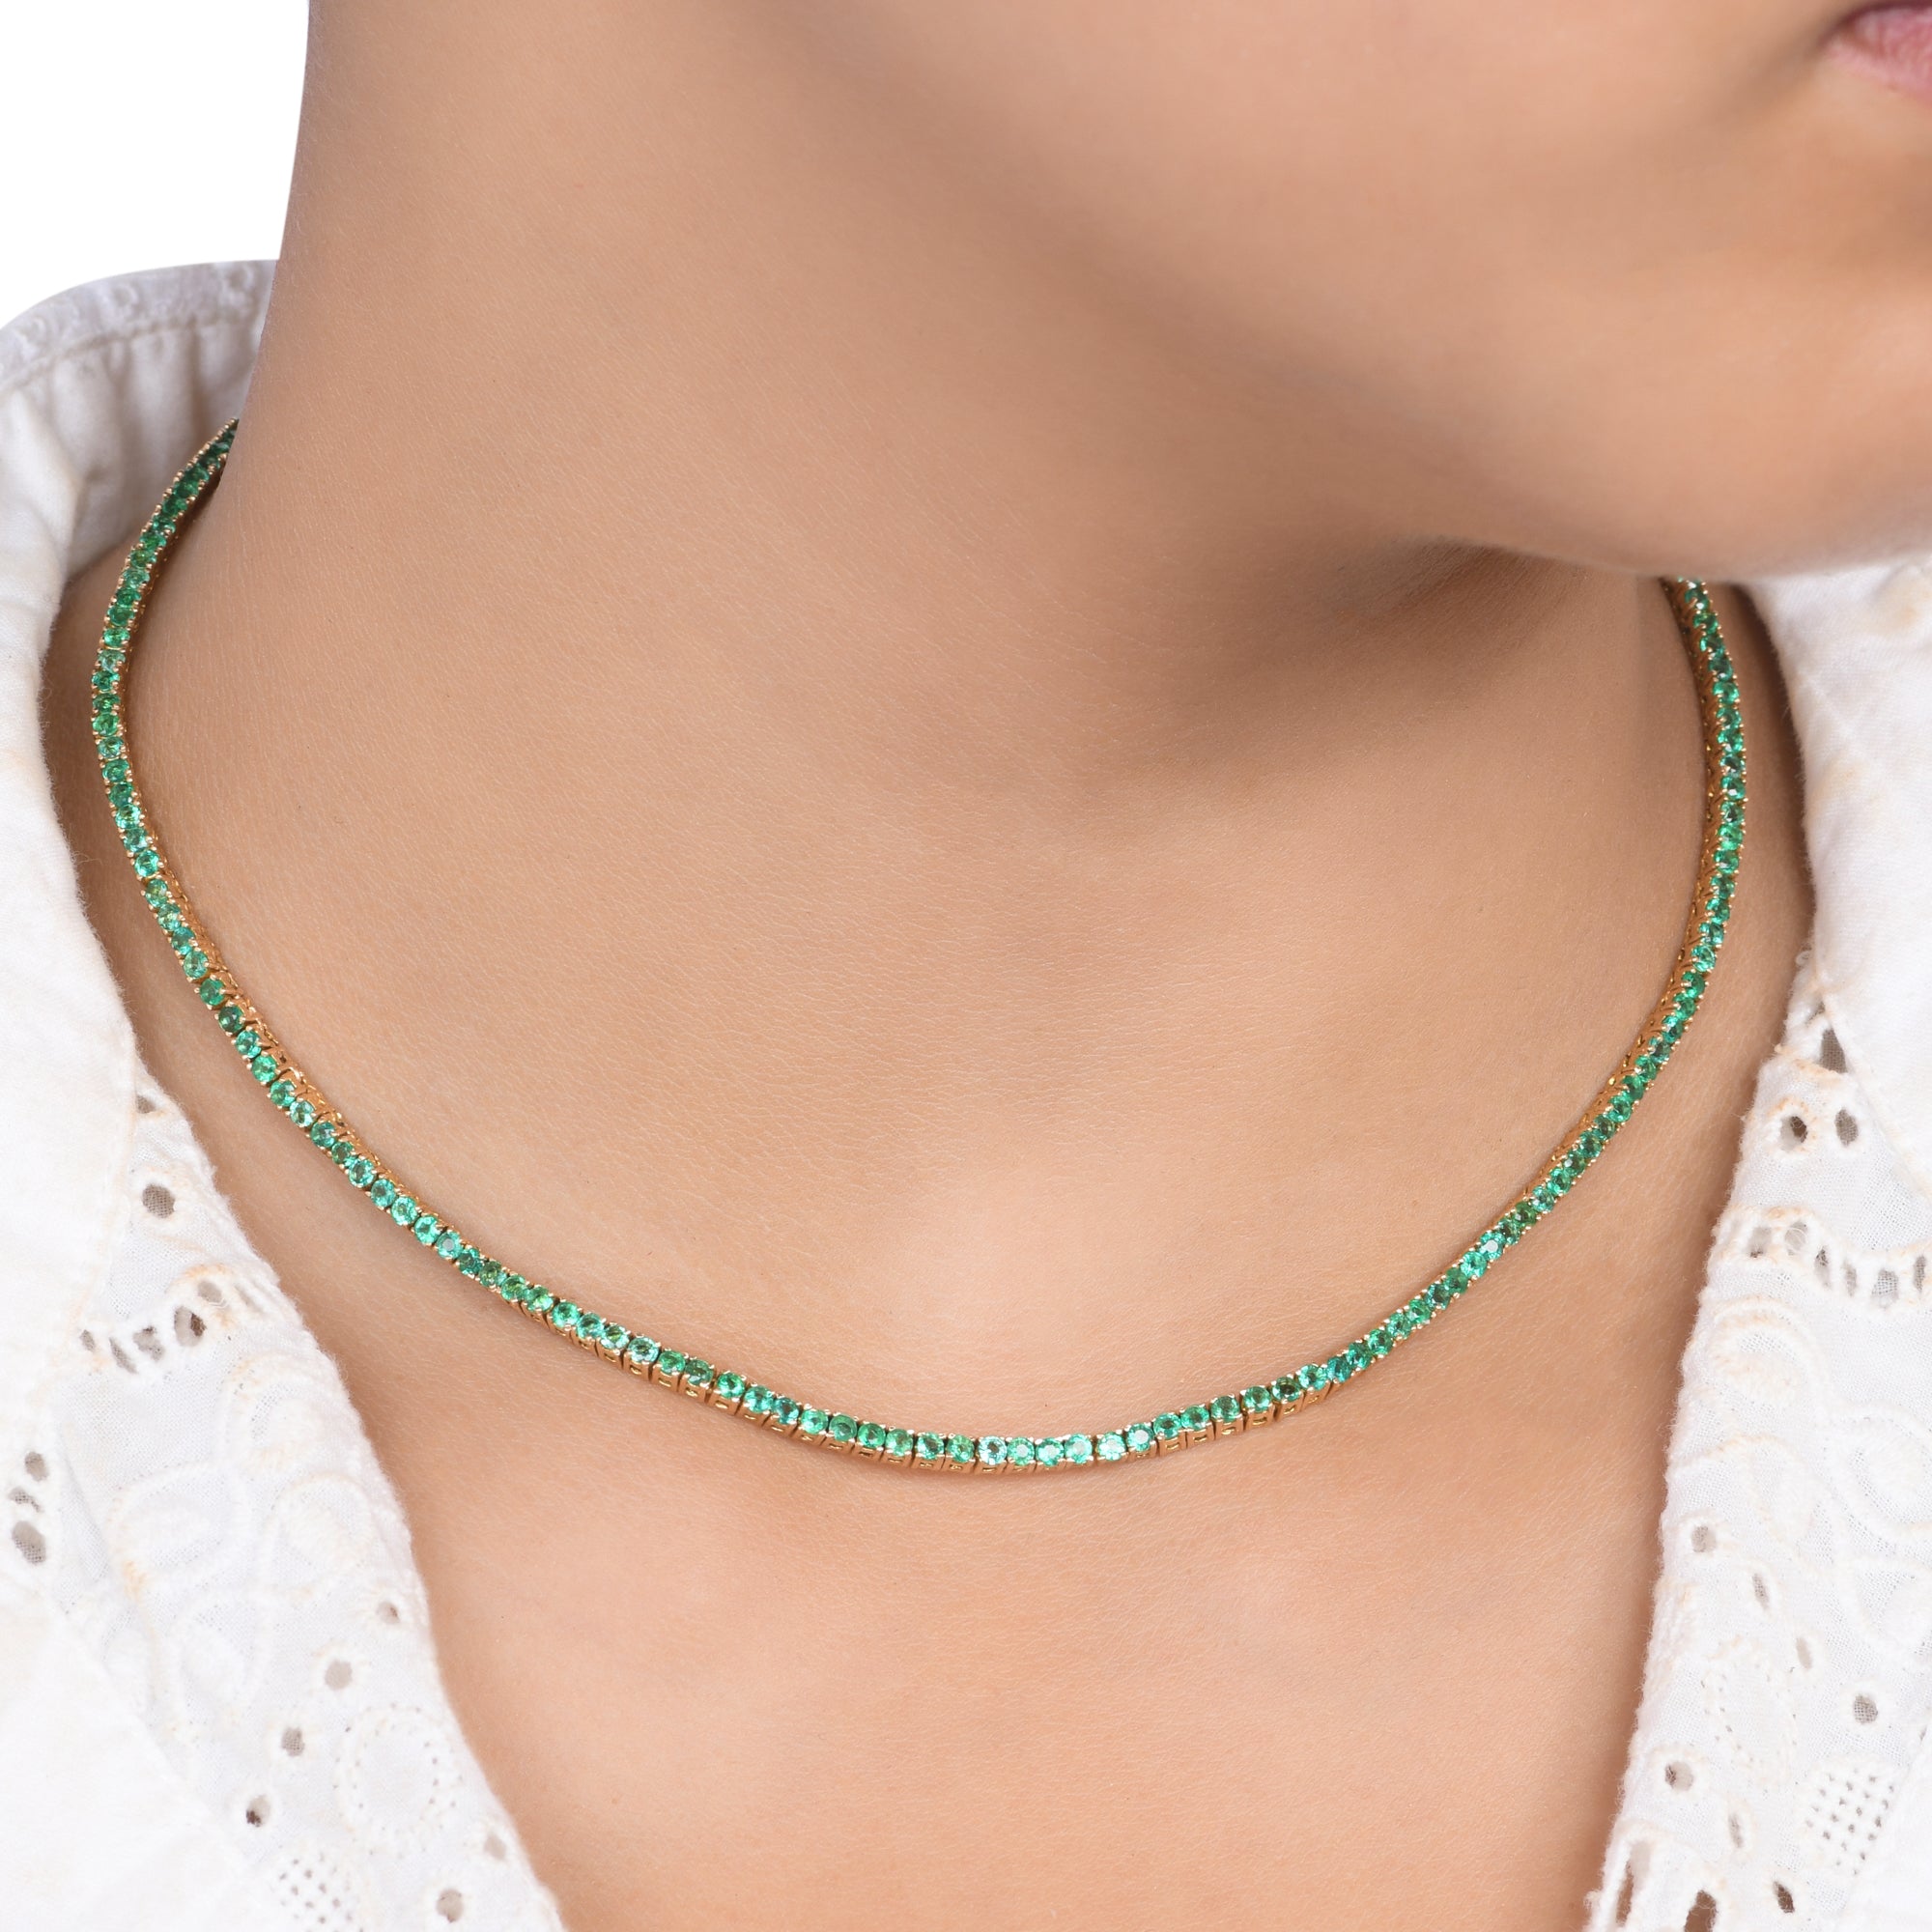 18kt yellow gold tennis necklace with emeralds